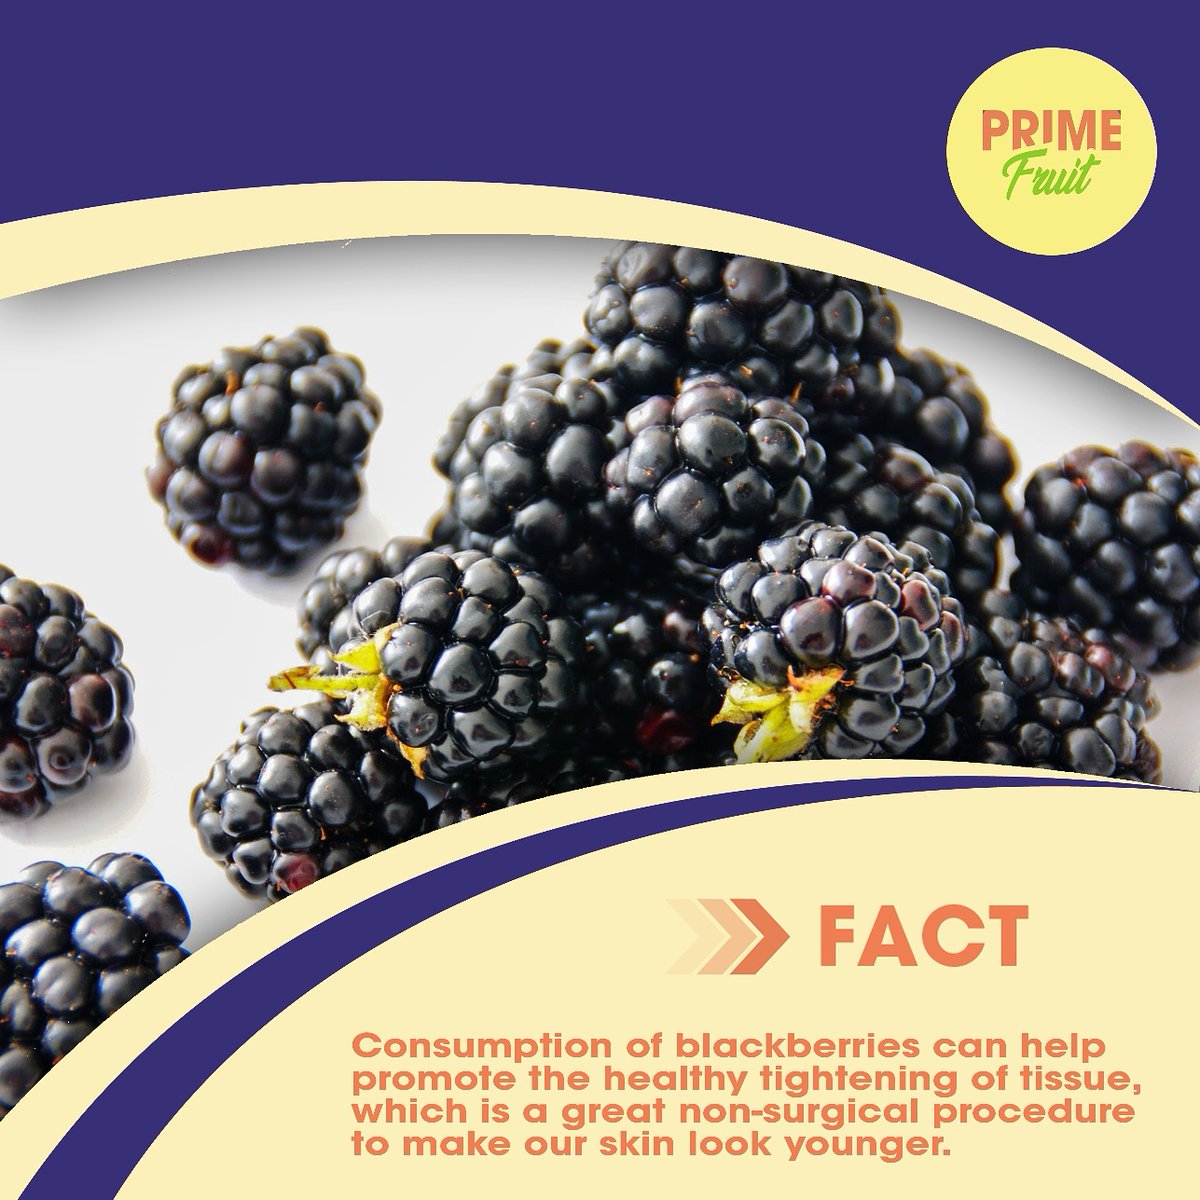 Did you know that the phenolic compounds in blackberries can slow down aging and protect the skin from UVB radiation?

#DubaiFruitDelivery #HealthyOffice #HealthyWorkplace #OfficeFruitDelivery #HomeFruitDelivery #Blackberries #BlackberryBenefits #AntioxidantRich #BlackberryFact